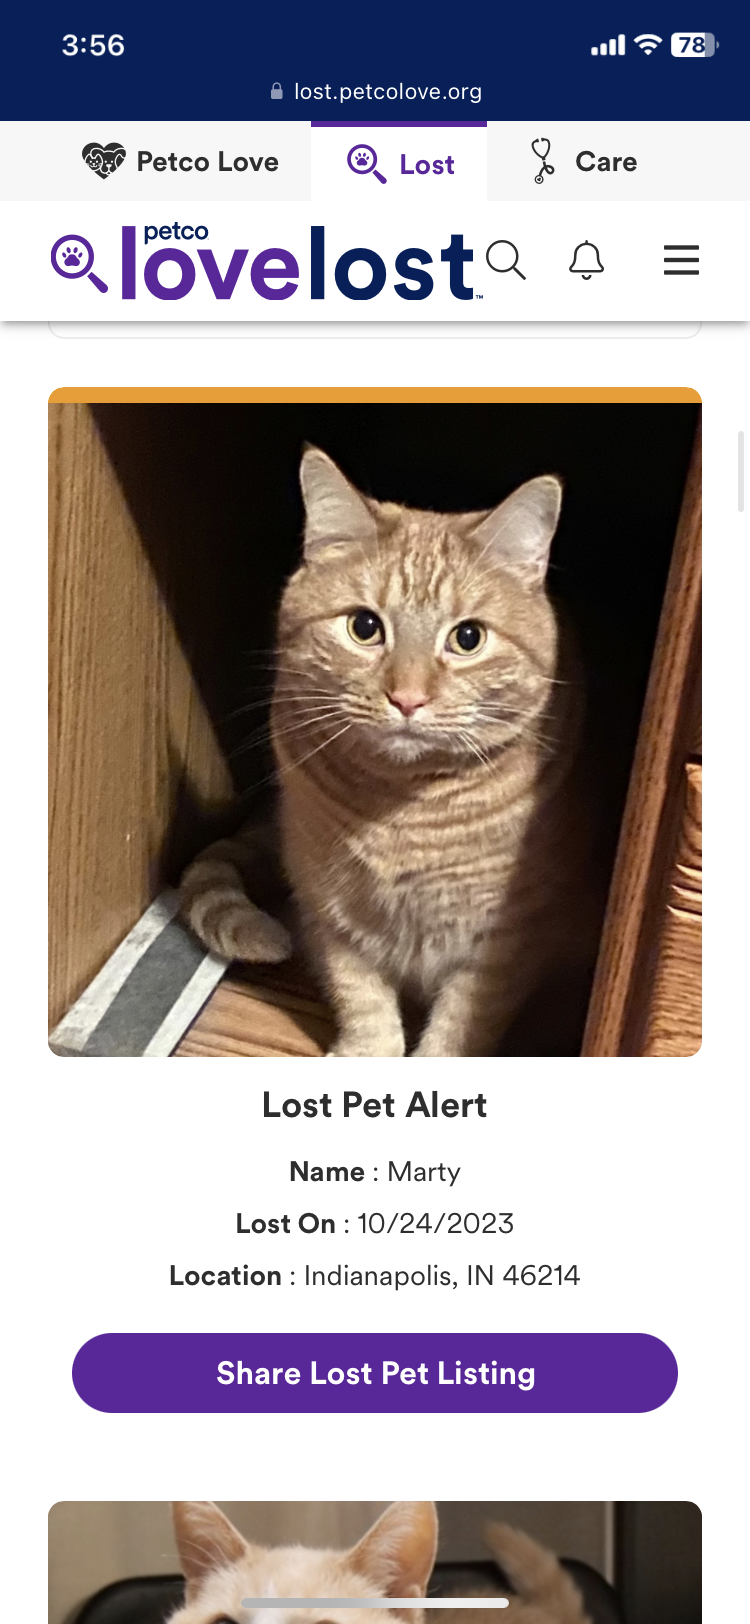 Image of Marty, Lost Cat